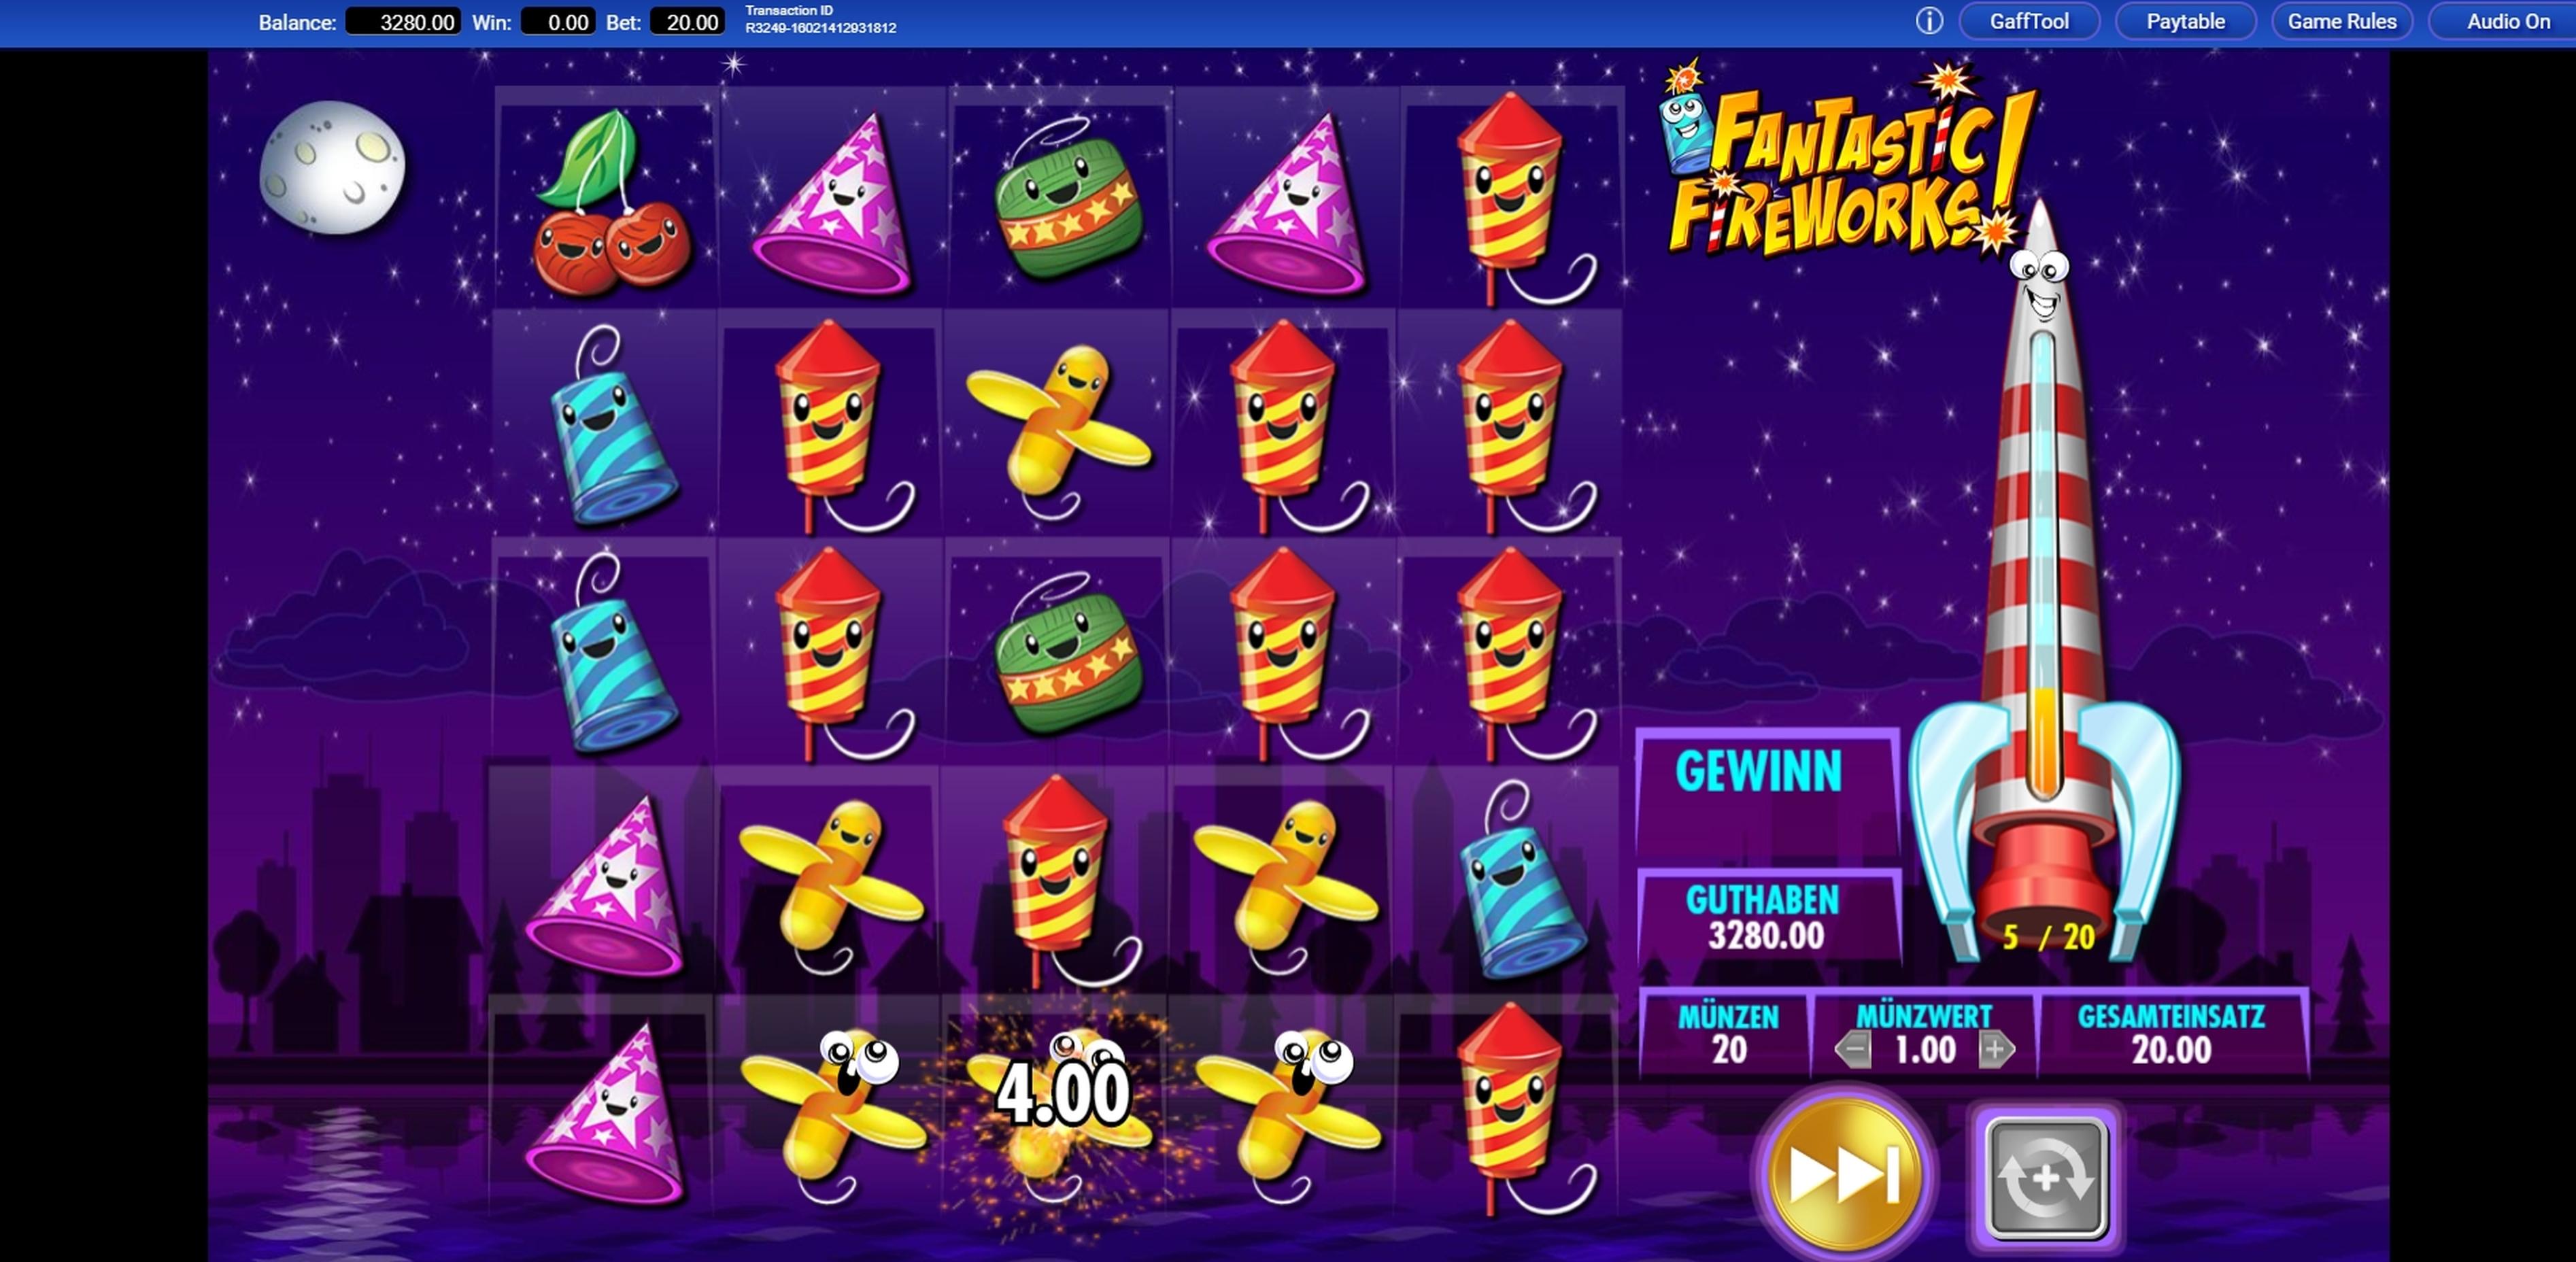 Win Money in Fantastic Fireworks! Free Slot Game by IGT